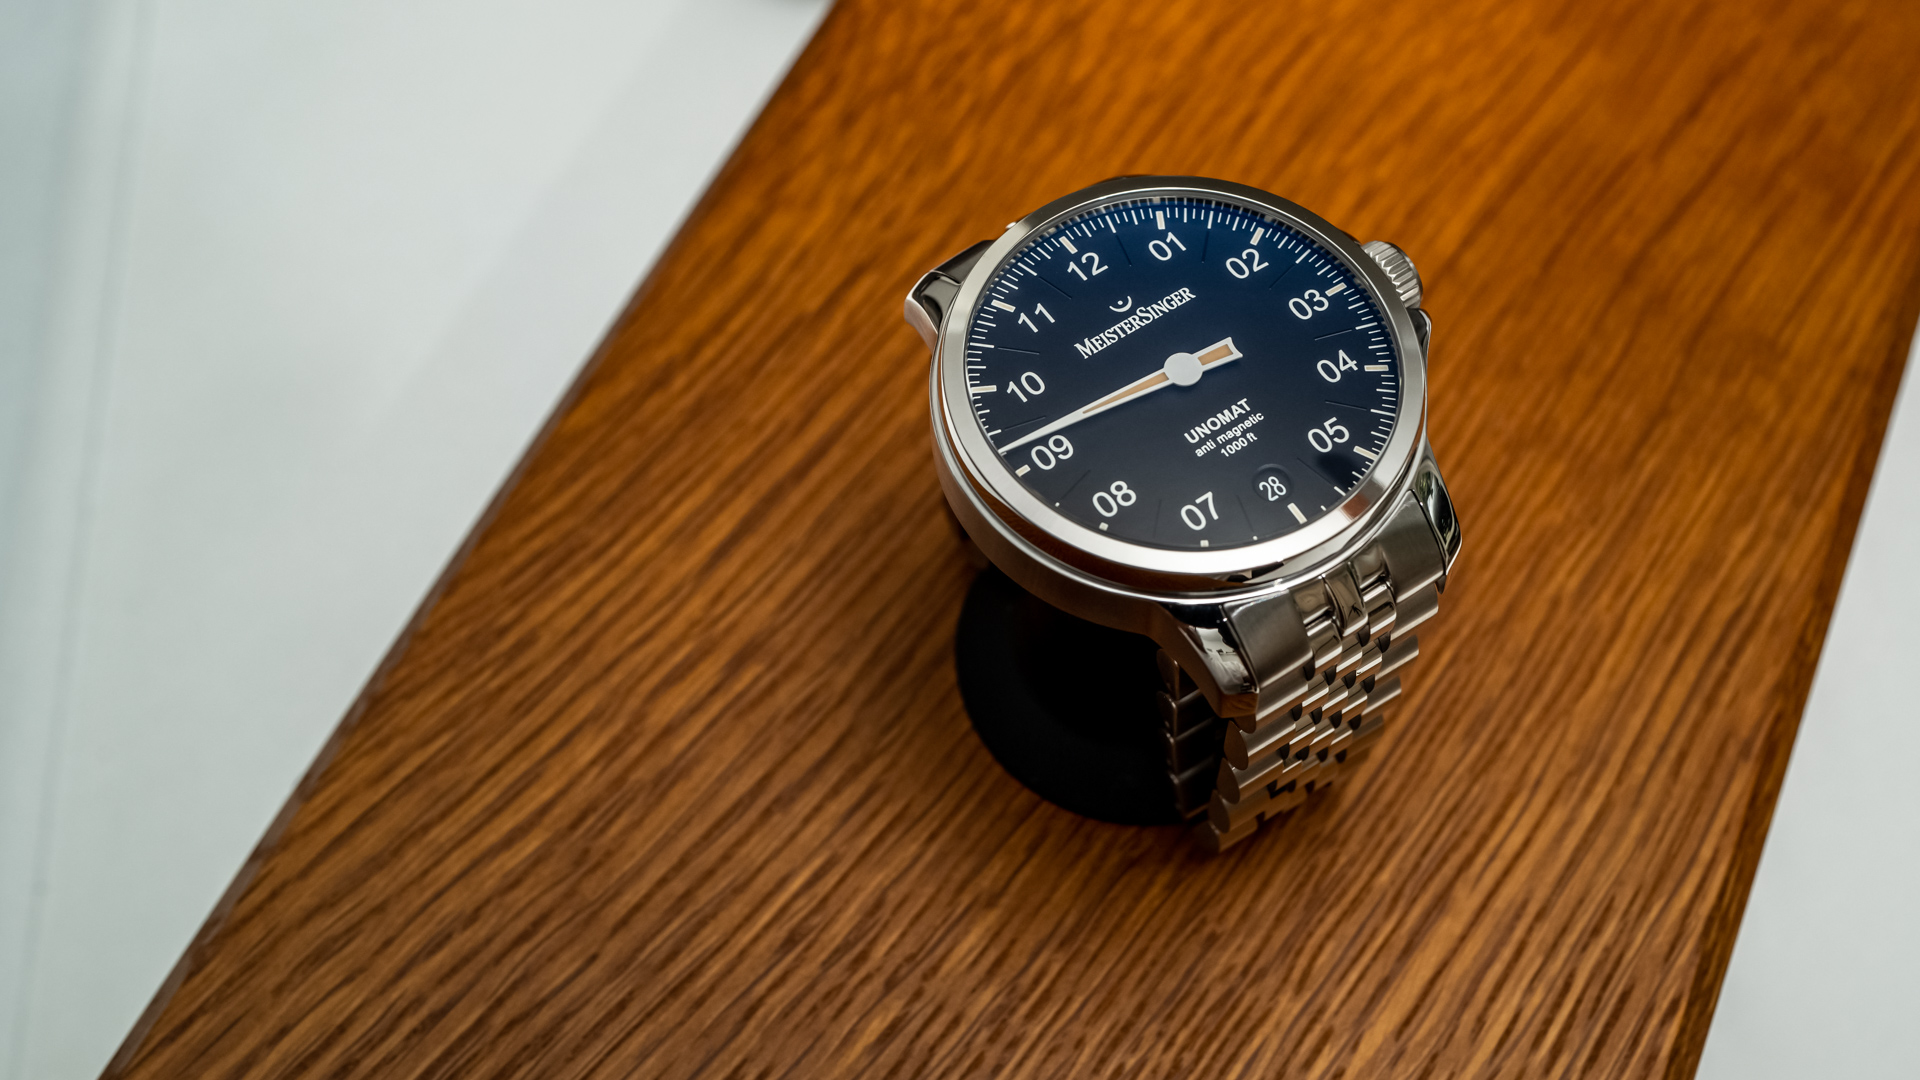 Meistersinger Toughens Its Classic Design With New Unomat Watch Series